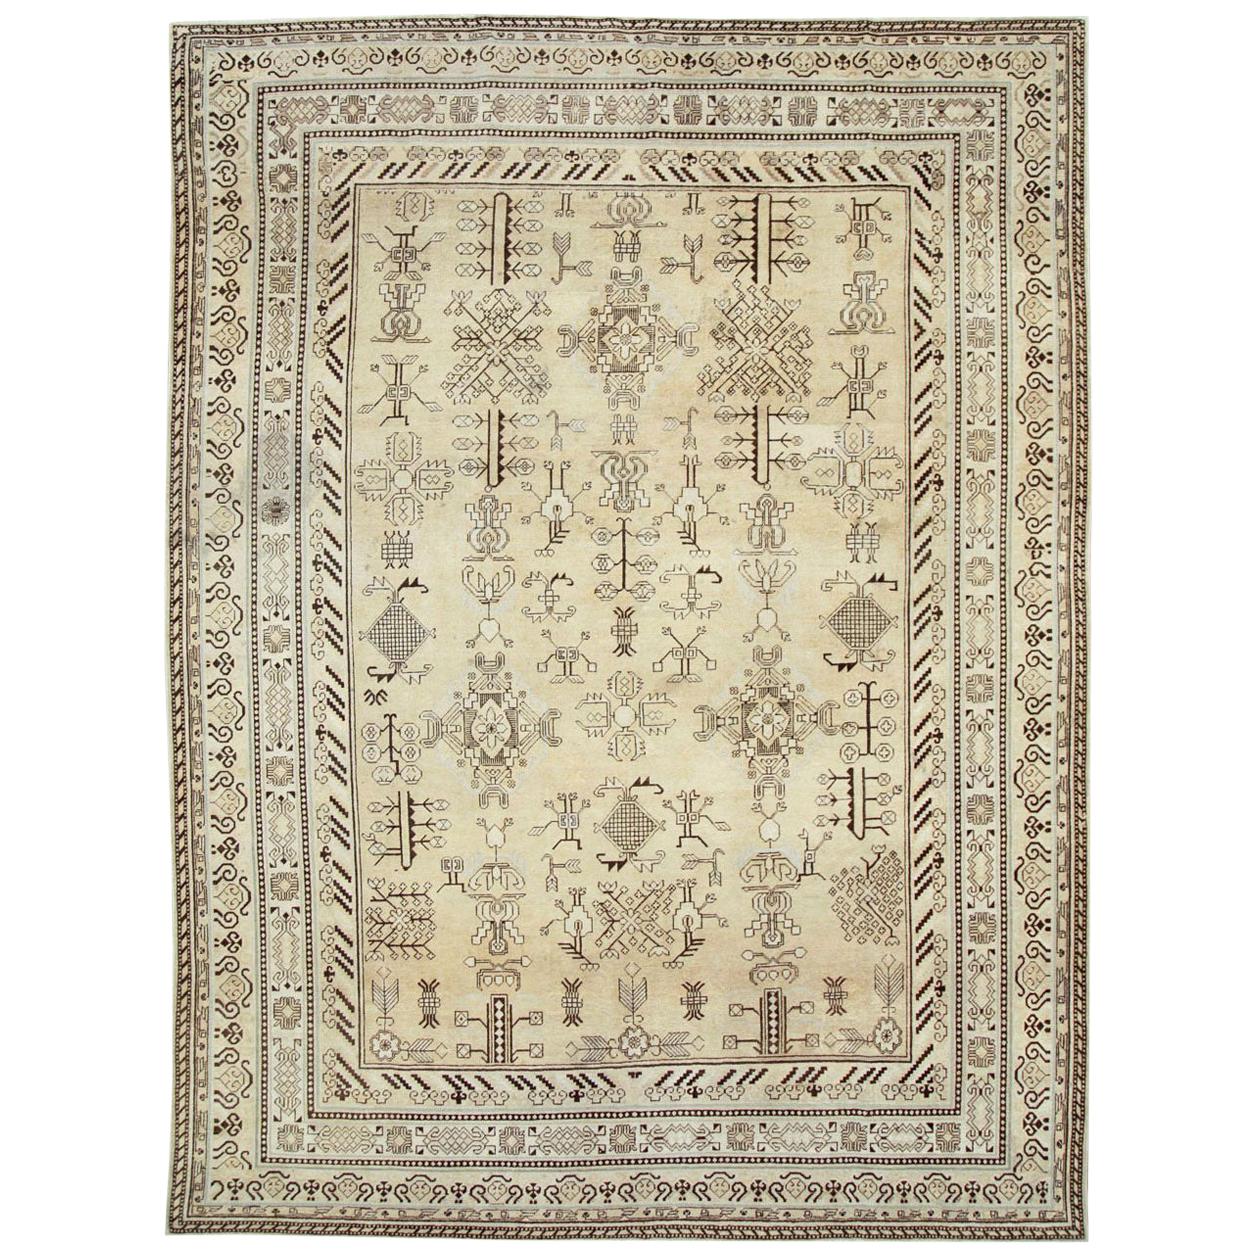 Early 20th Century Handmade Khotan Room Size Rug in Beige and Brown